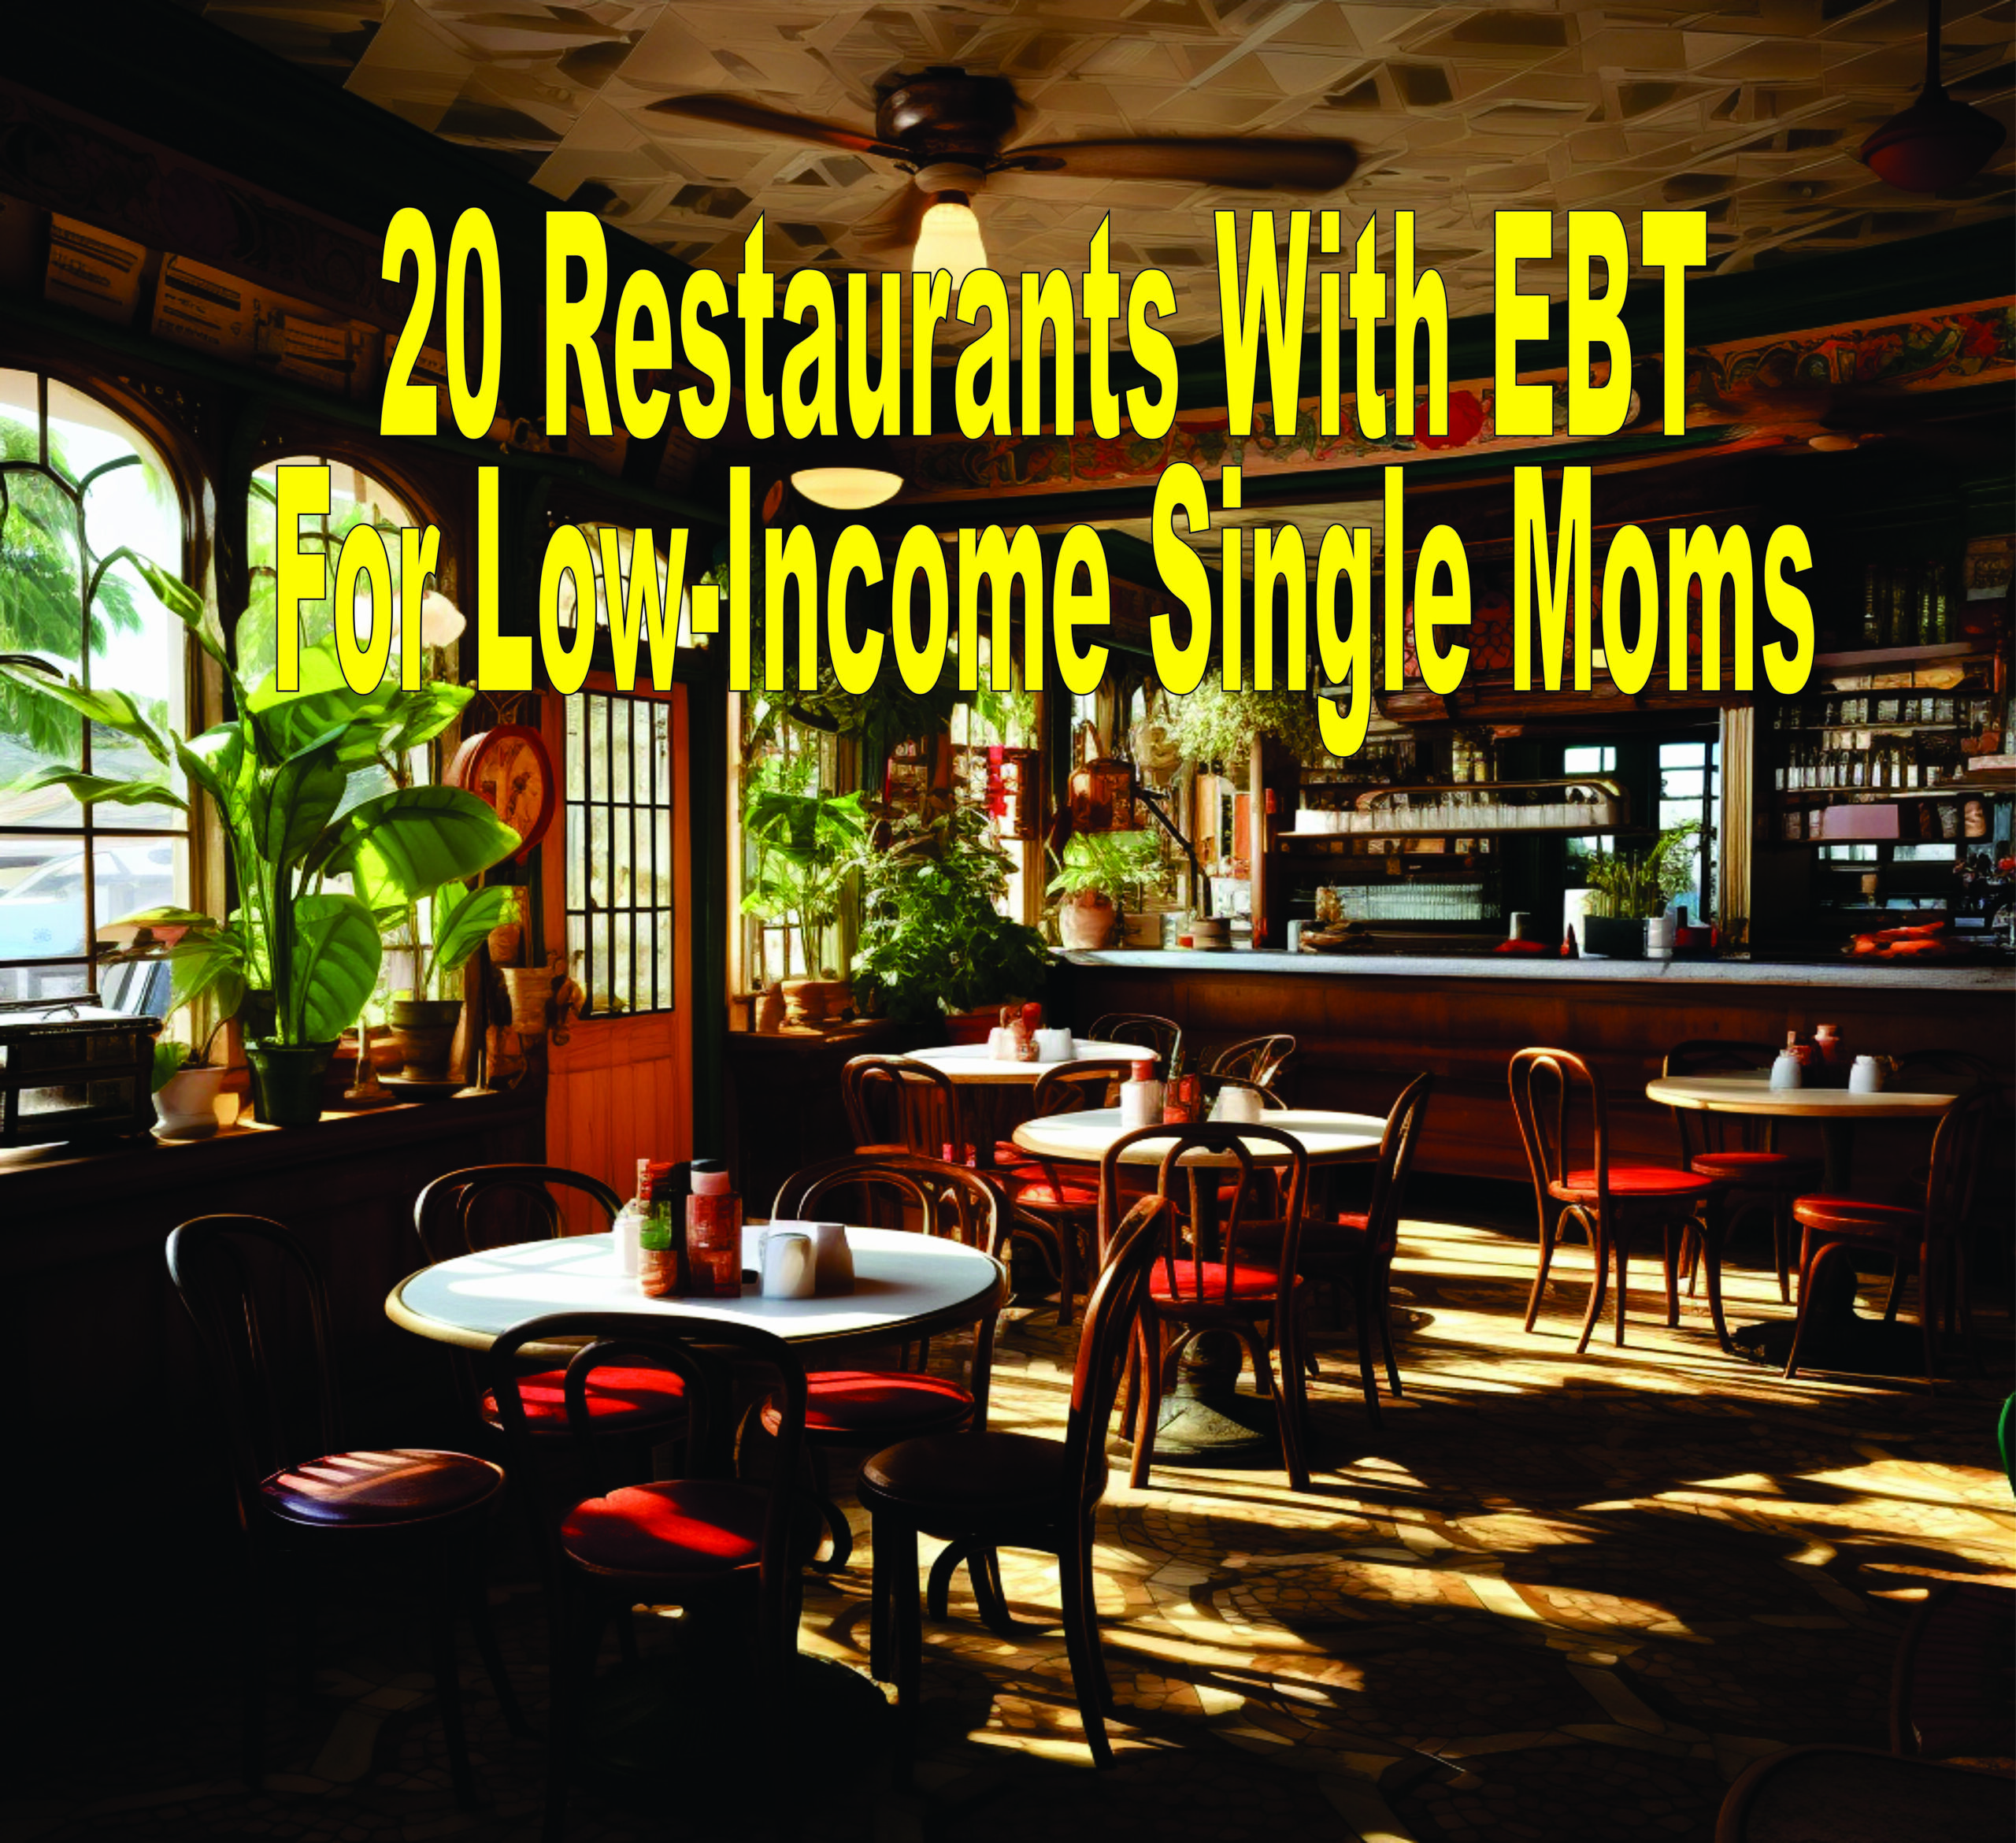 20 Restaurants With Ebt For Low Income Single Moms